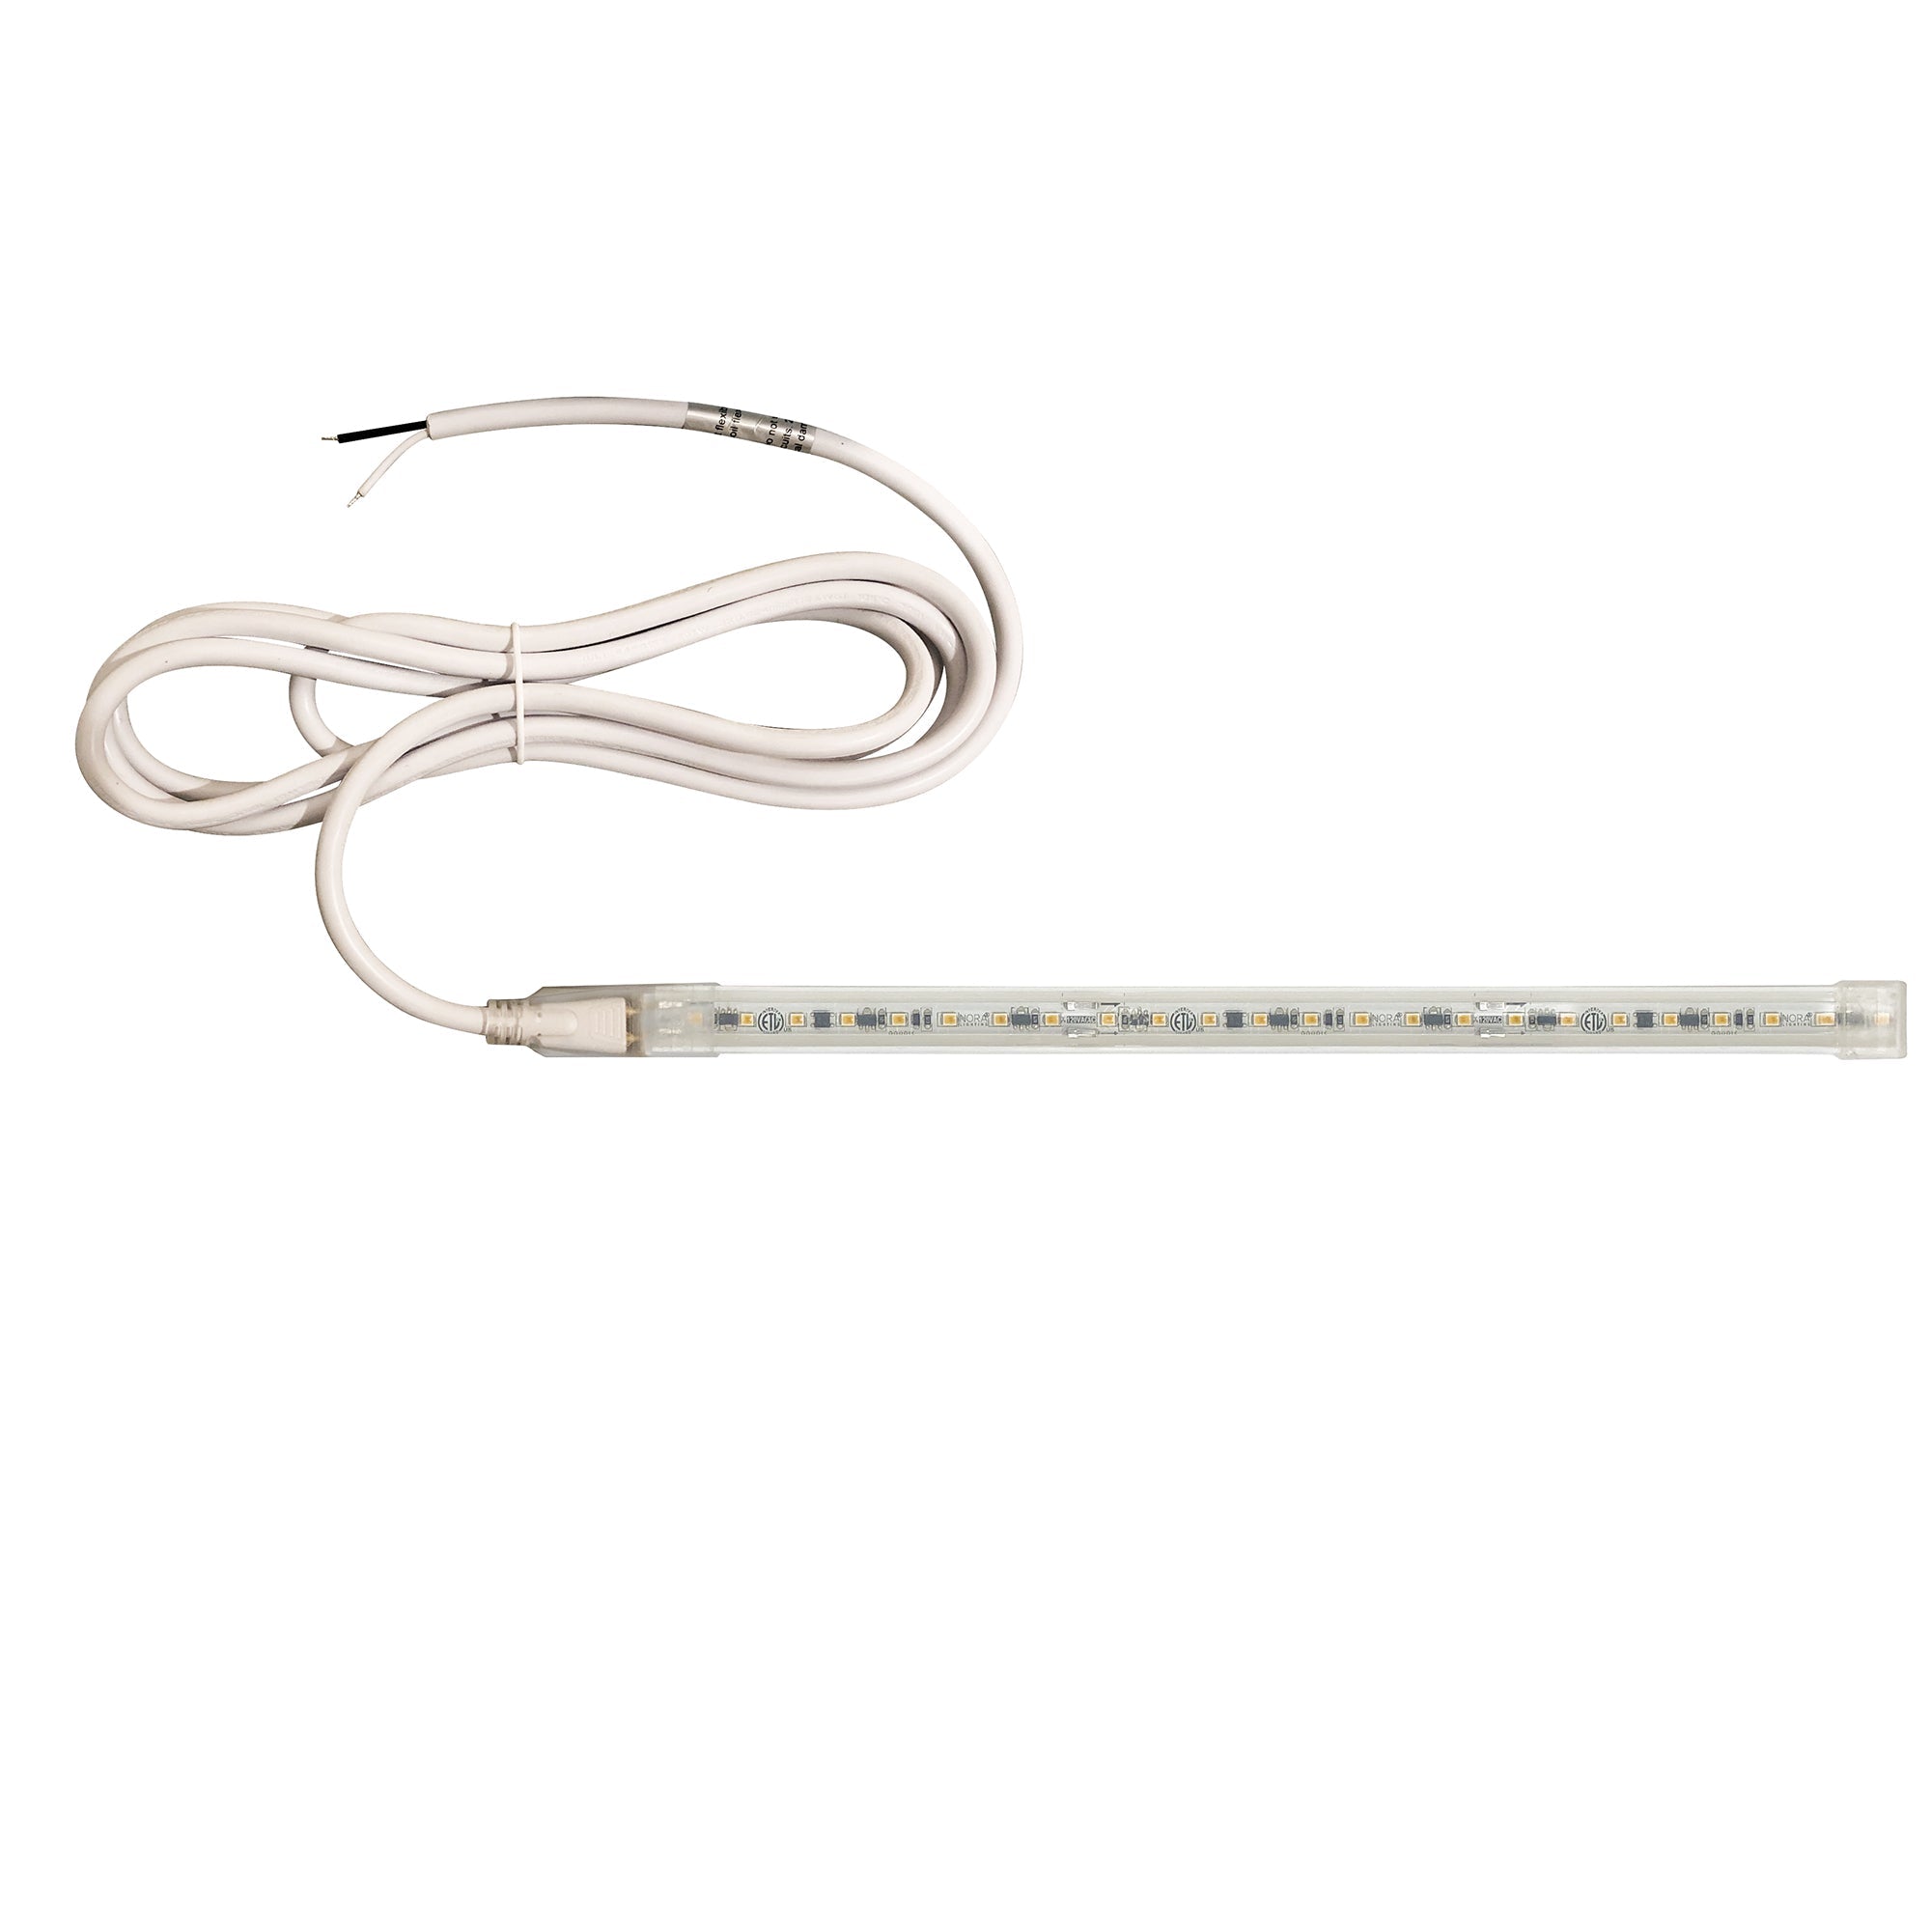 Nora Lighting NUTP13-W10-8-12-927/HW - Accent / Undercabinet - Custom Cut 10-ft, 8-in 120V Continuous LED Tape Light, 330lm / 3.6W per foot, 2700K, w/ Mounting Clips and 8' Hardwired Power Cord